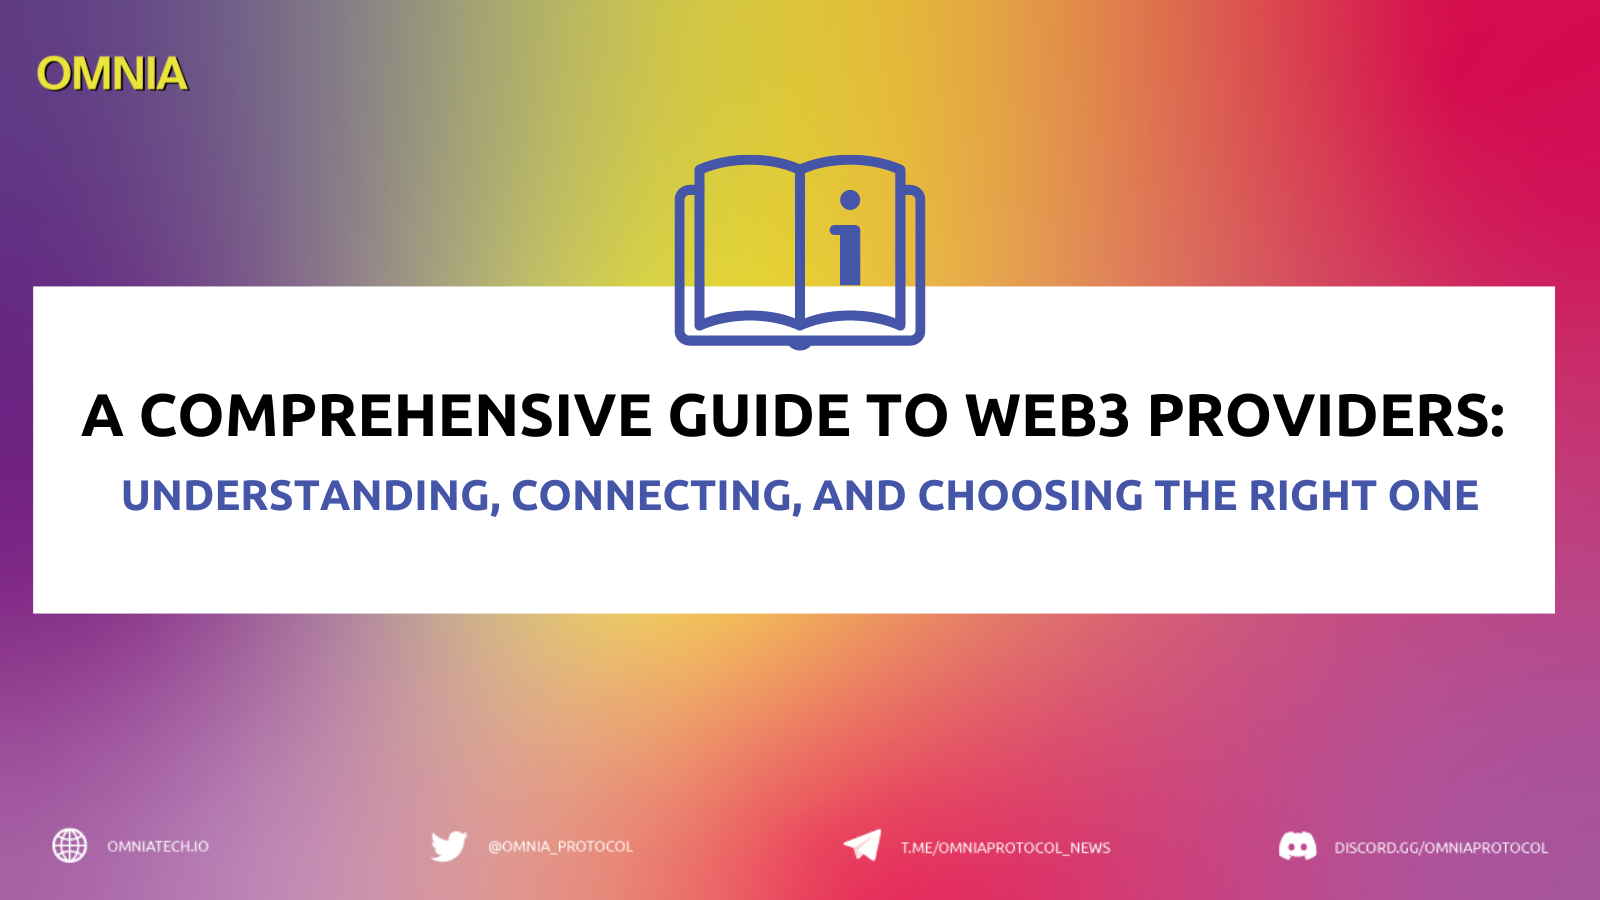 A Comprehensive Guide to Web3 Providers: Understanding, Connecting, and Choosing the Right One